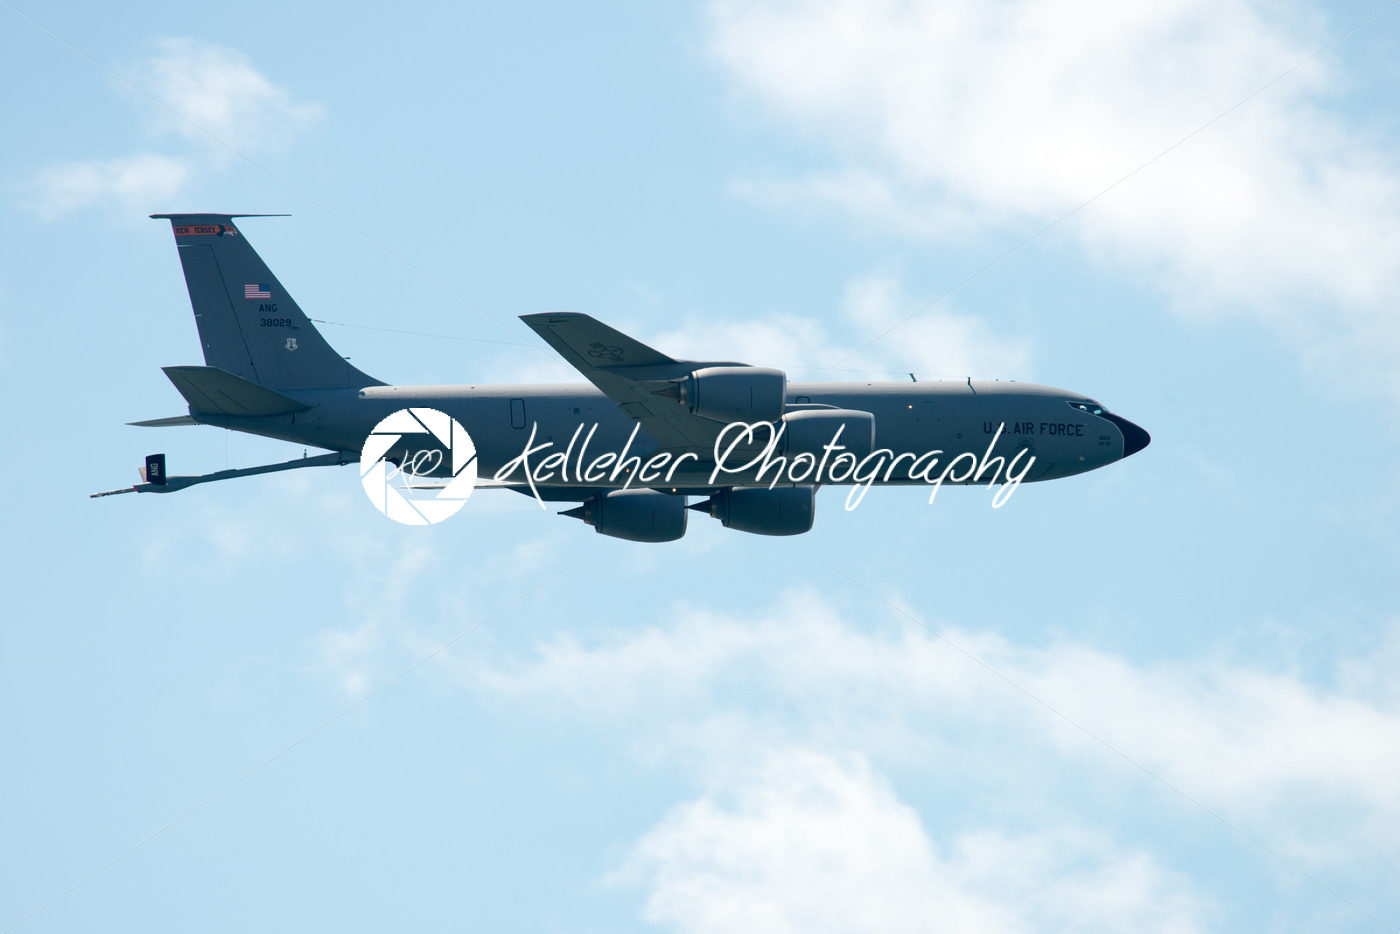 ATLANTIC CITY, NJ – AUGUST 17: US Air Force plane performing at the Annual Atlantic City Air Show on August 17, 2016 - Kelleher Photography Store